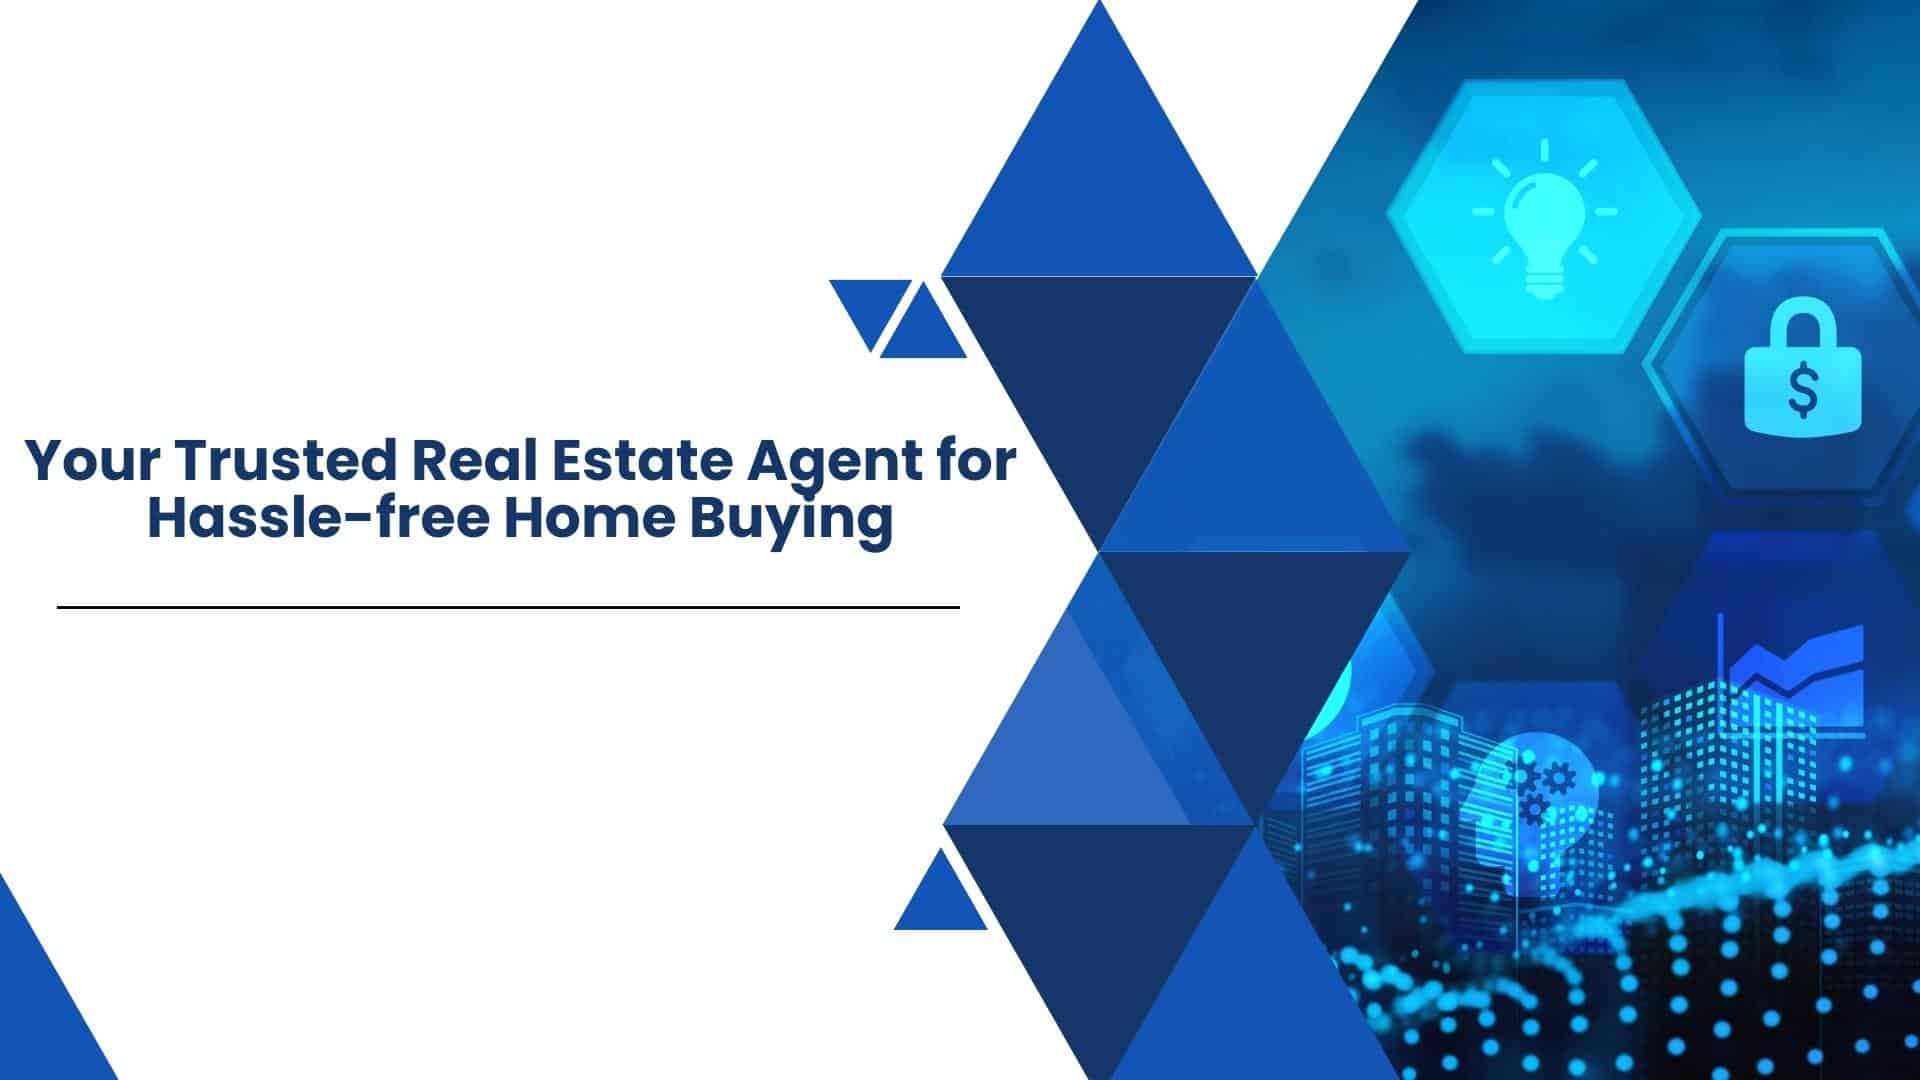 Your Trusted Real Estate Agent for Hassle-free Home Buying